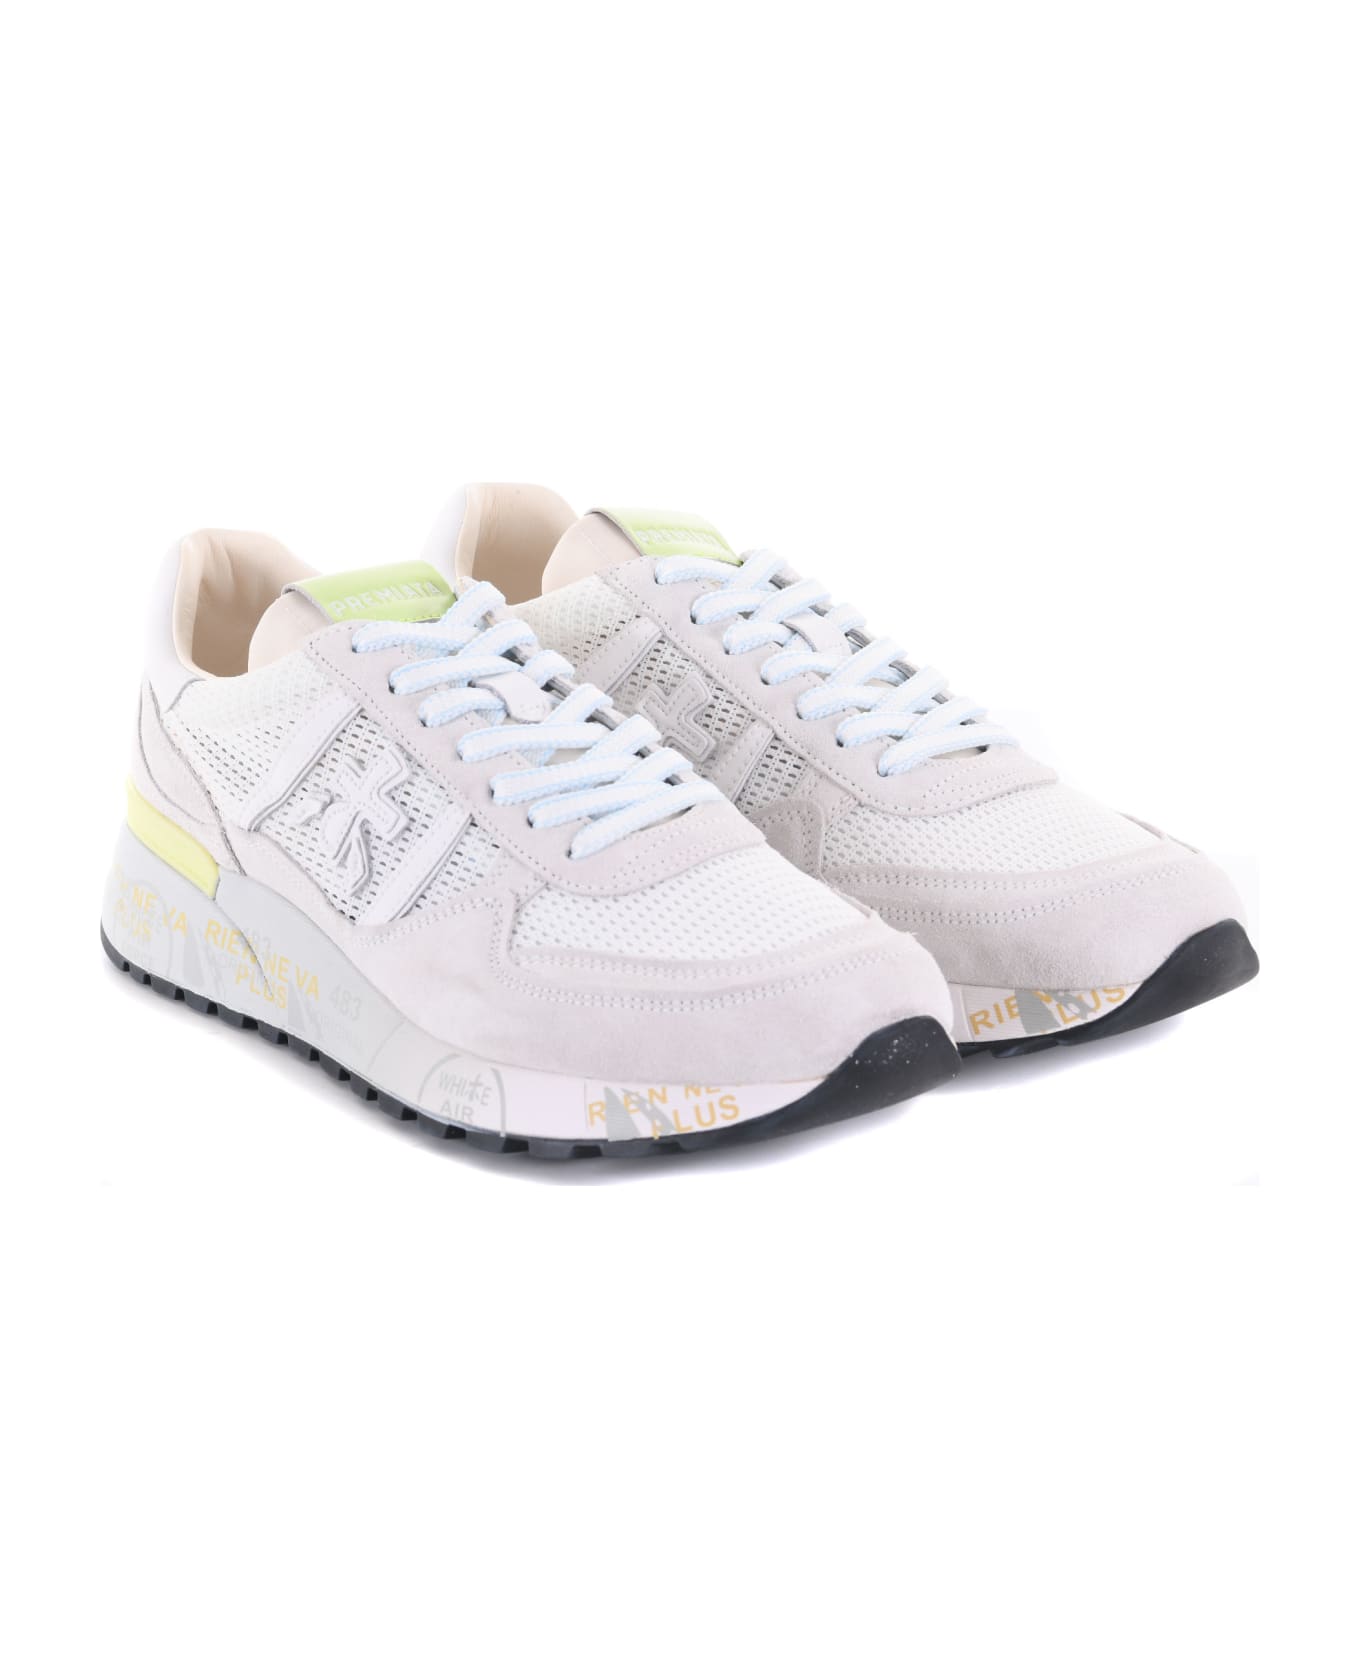 Premiata Sneakers In Suede And Perforated Mesh Scafati Store Available - Ghiaccio/bianco